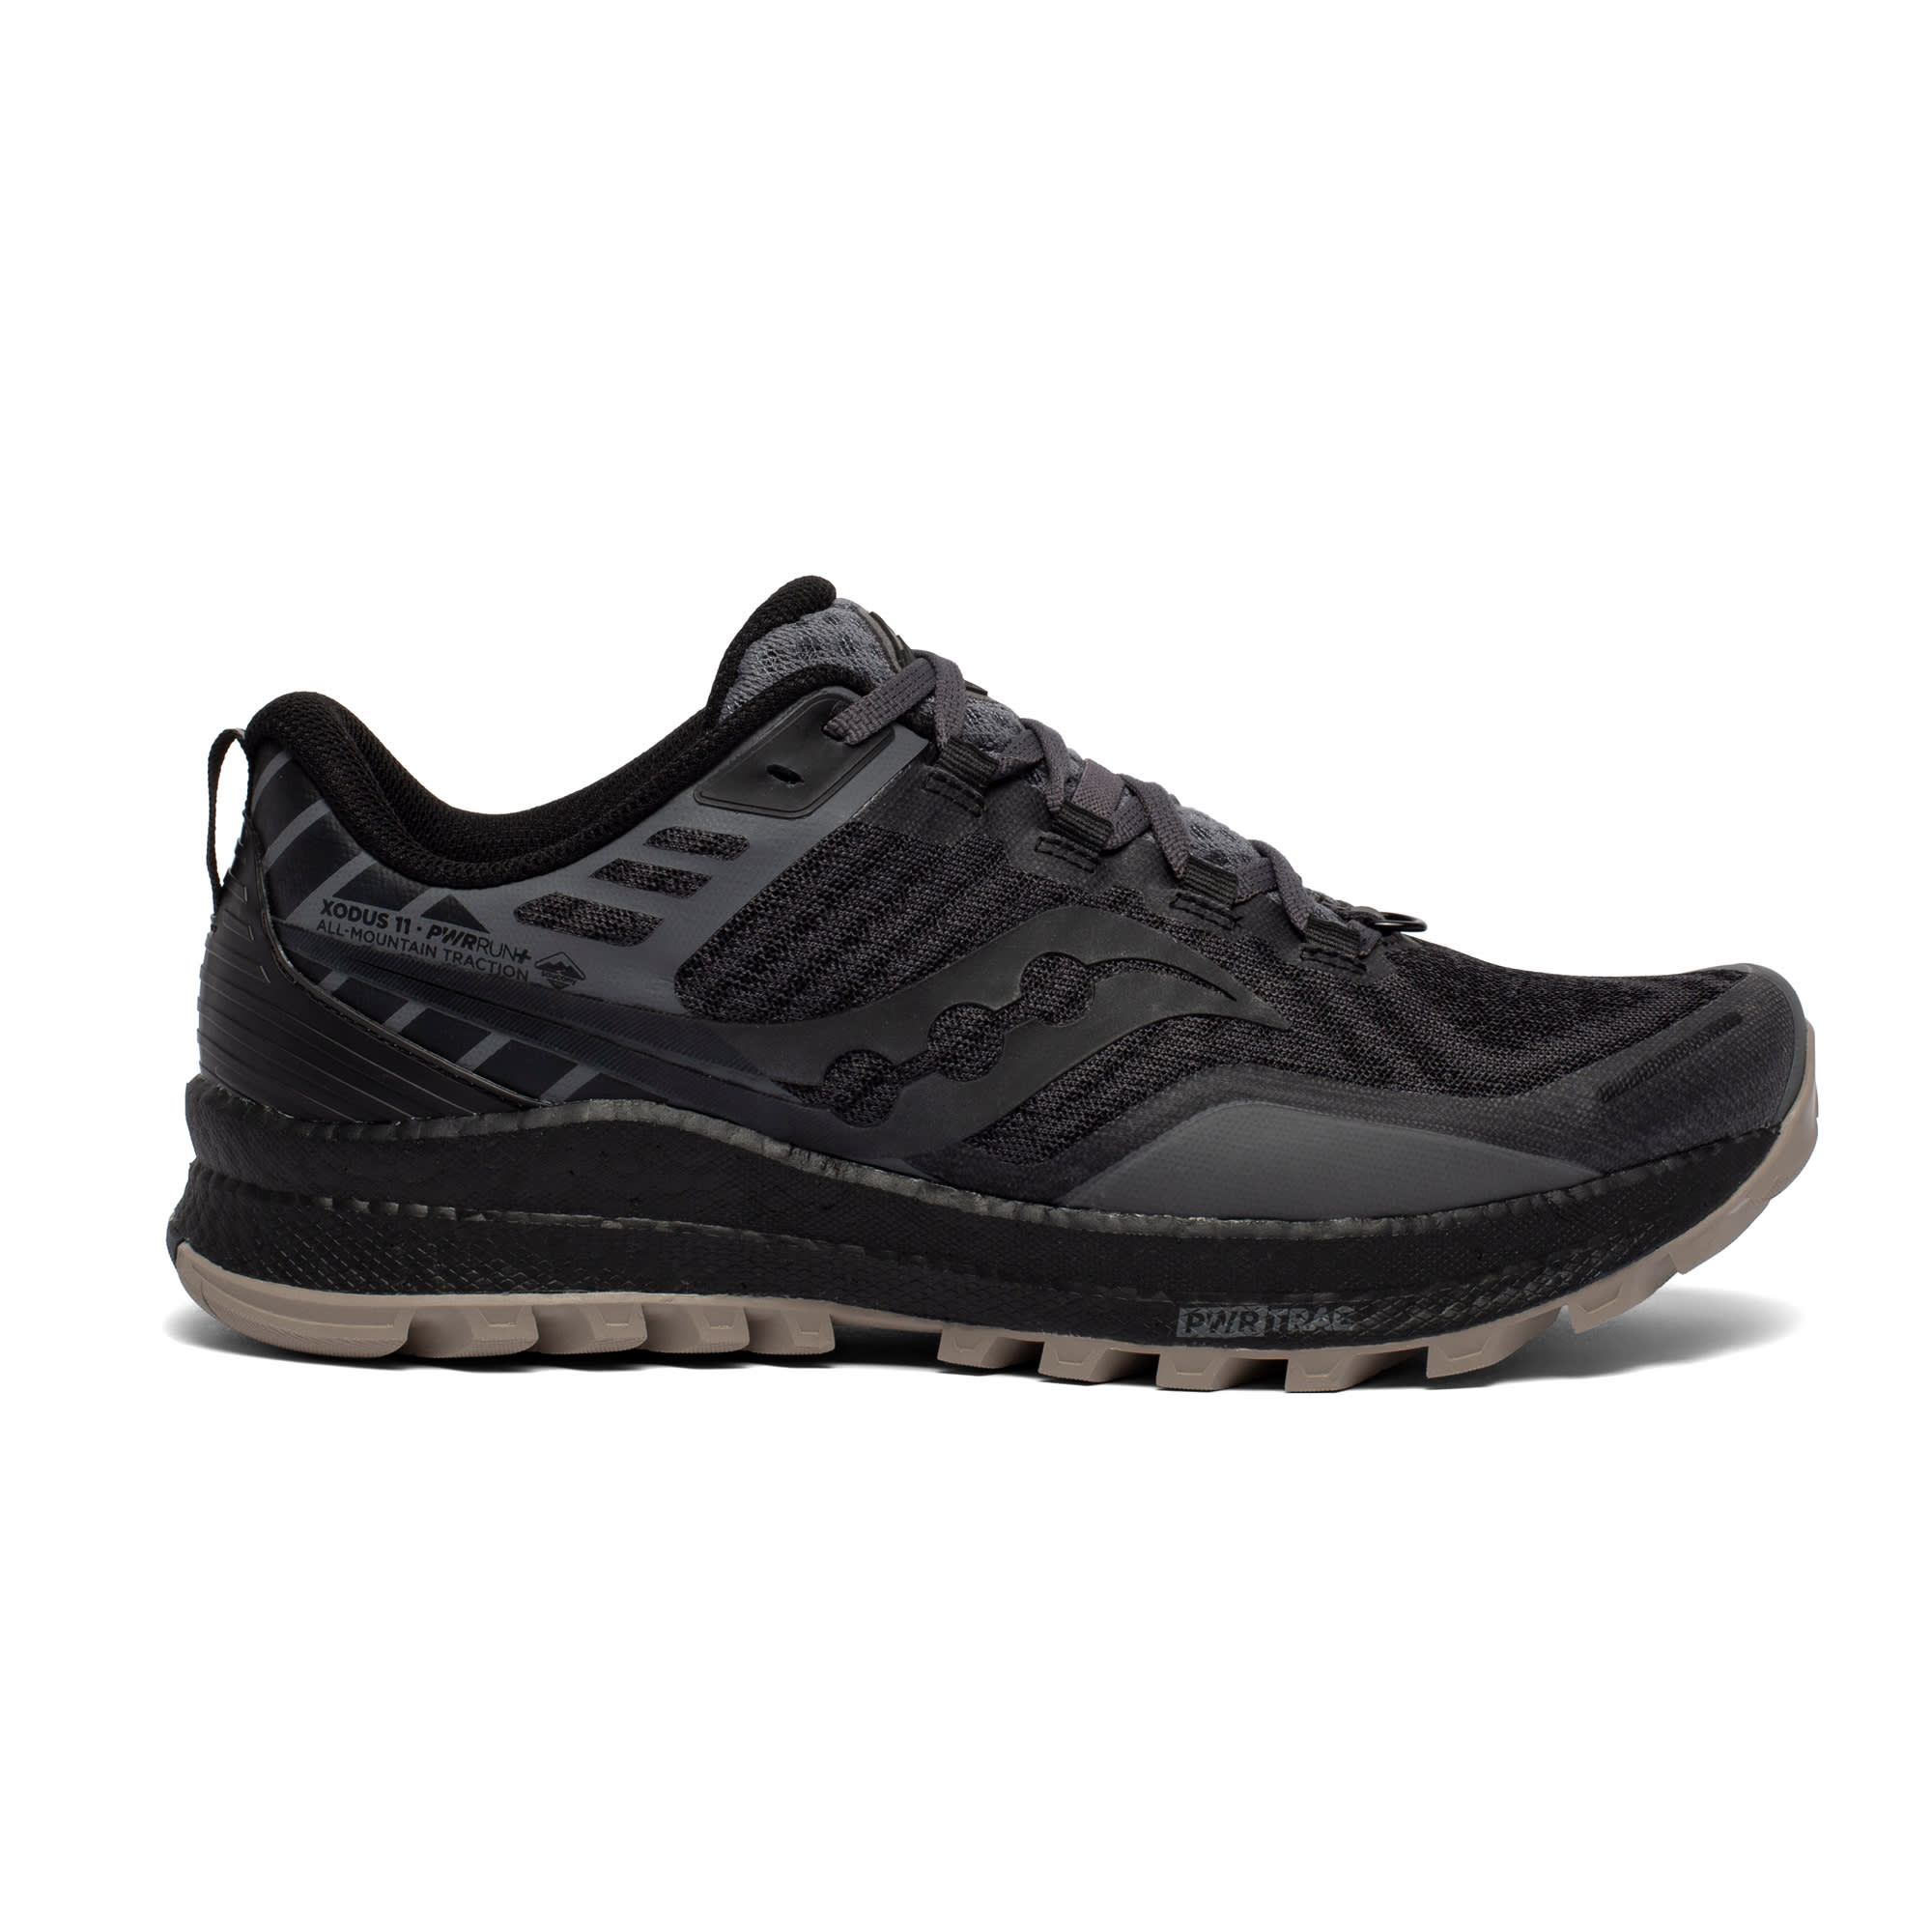 Buy Saucony Men's Xodus 11 from Outnorth